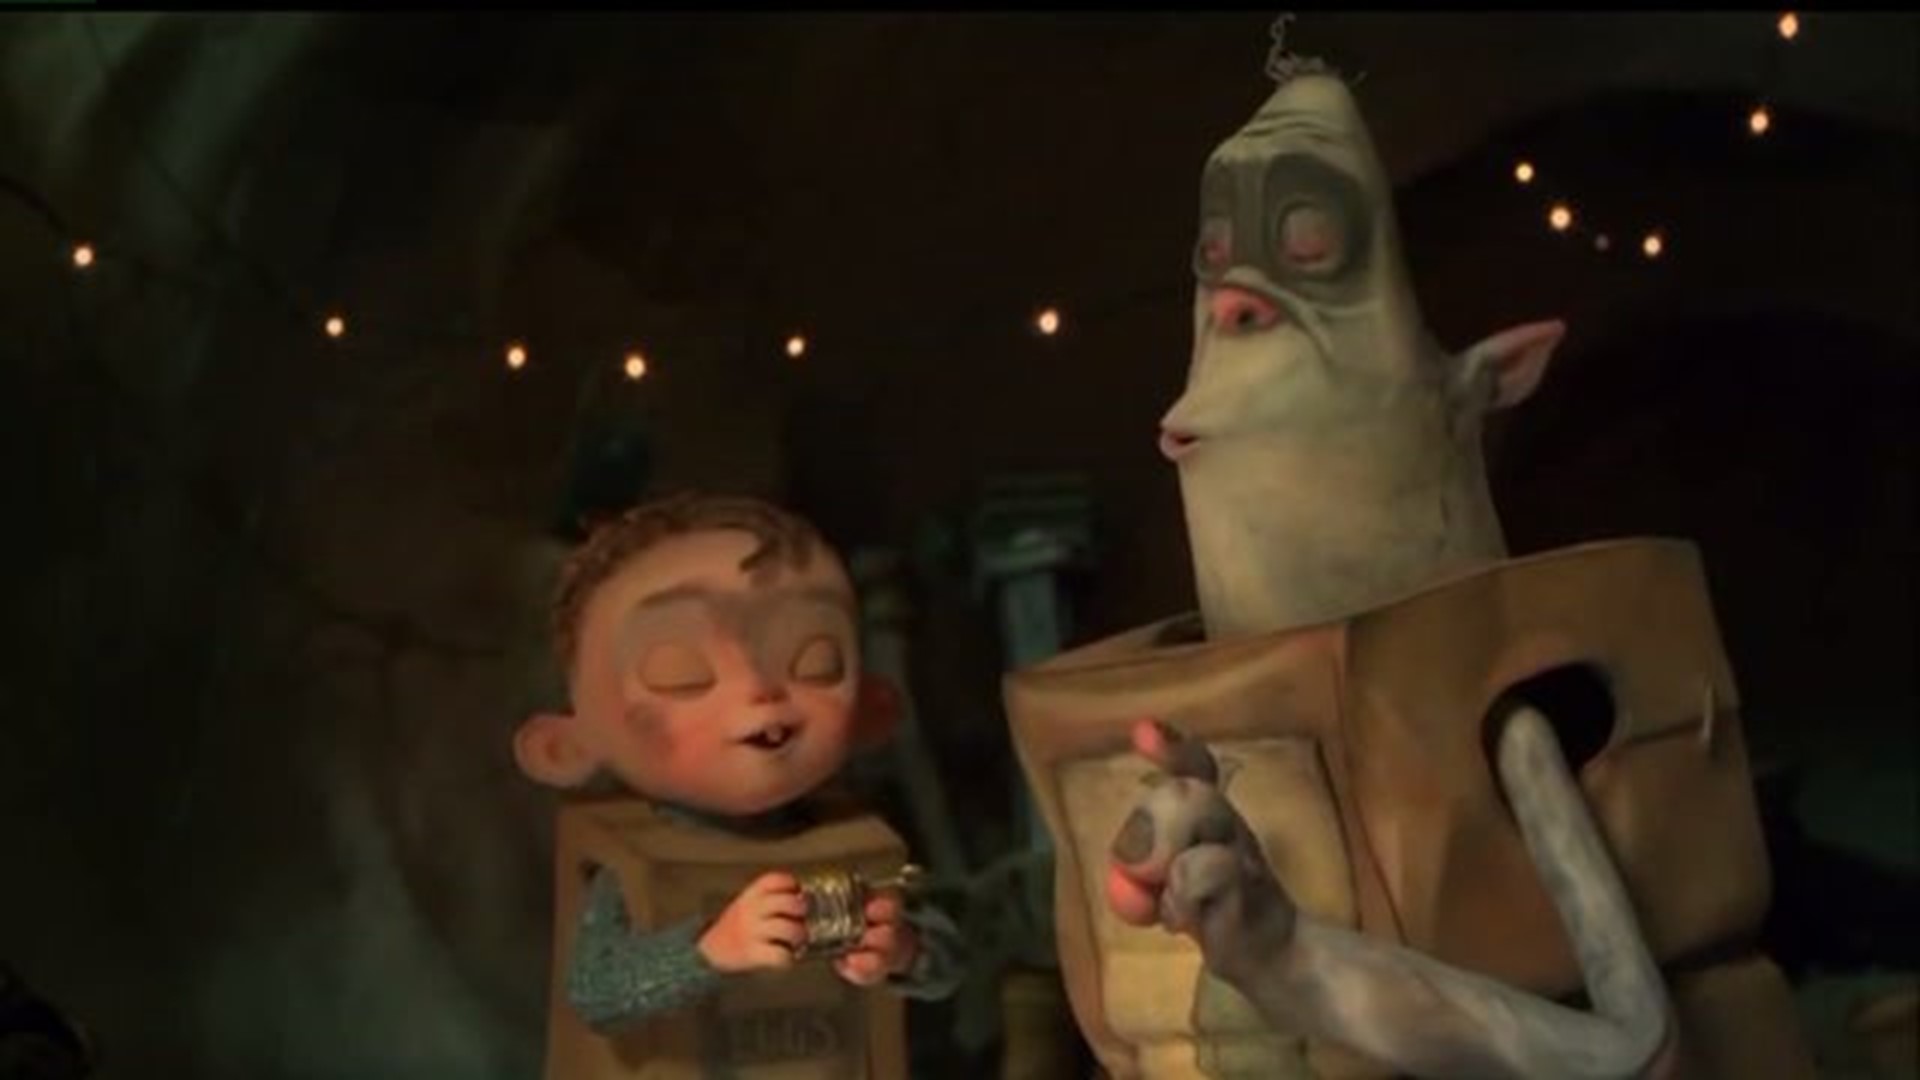 Steve At The Movies: The Boxtrolls